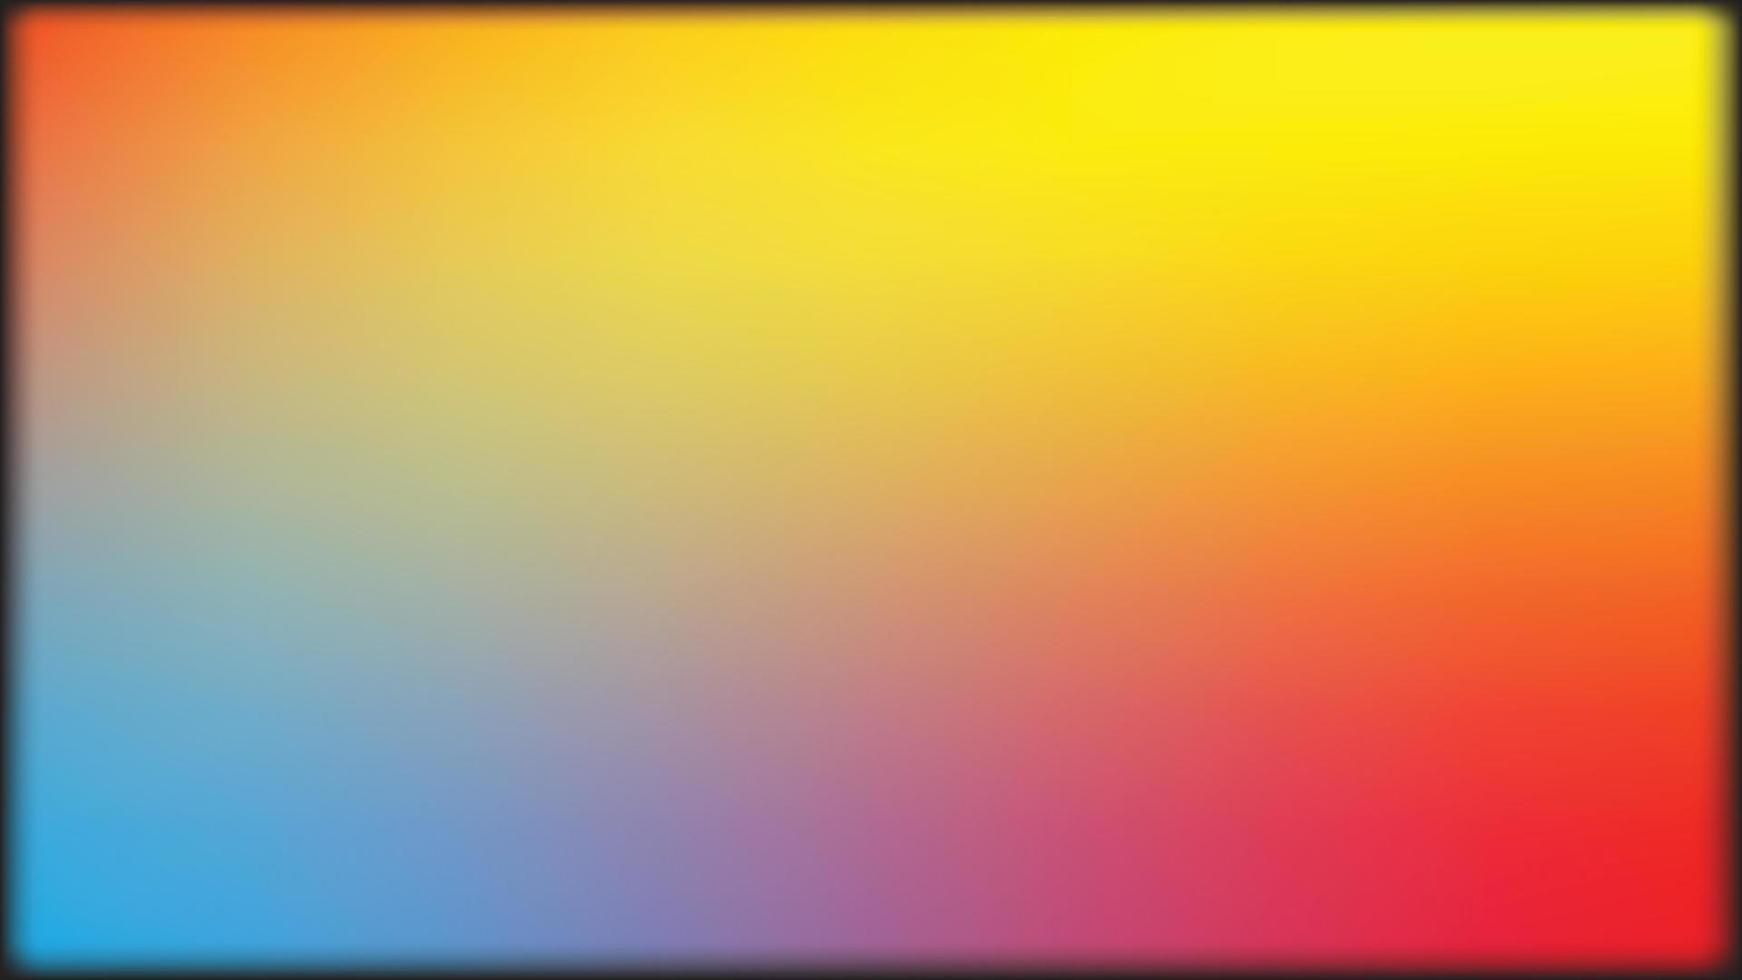 Abstract Colorful smooth Gradient Background, multi color background, banner background vector